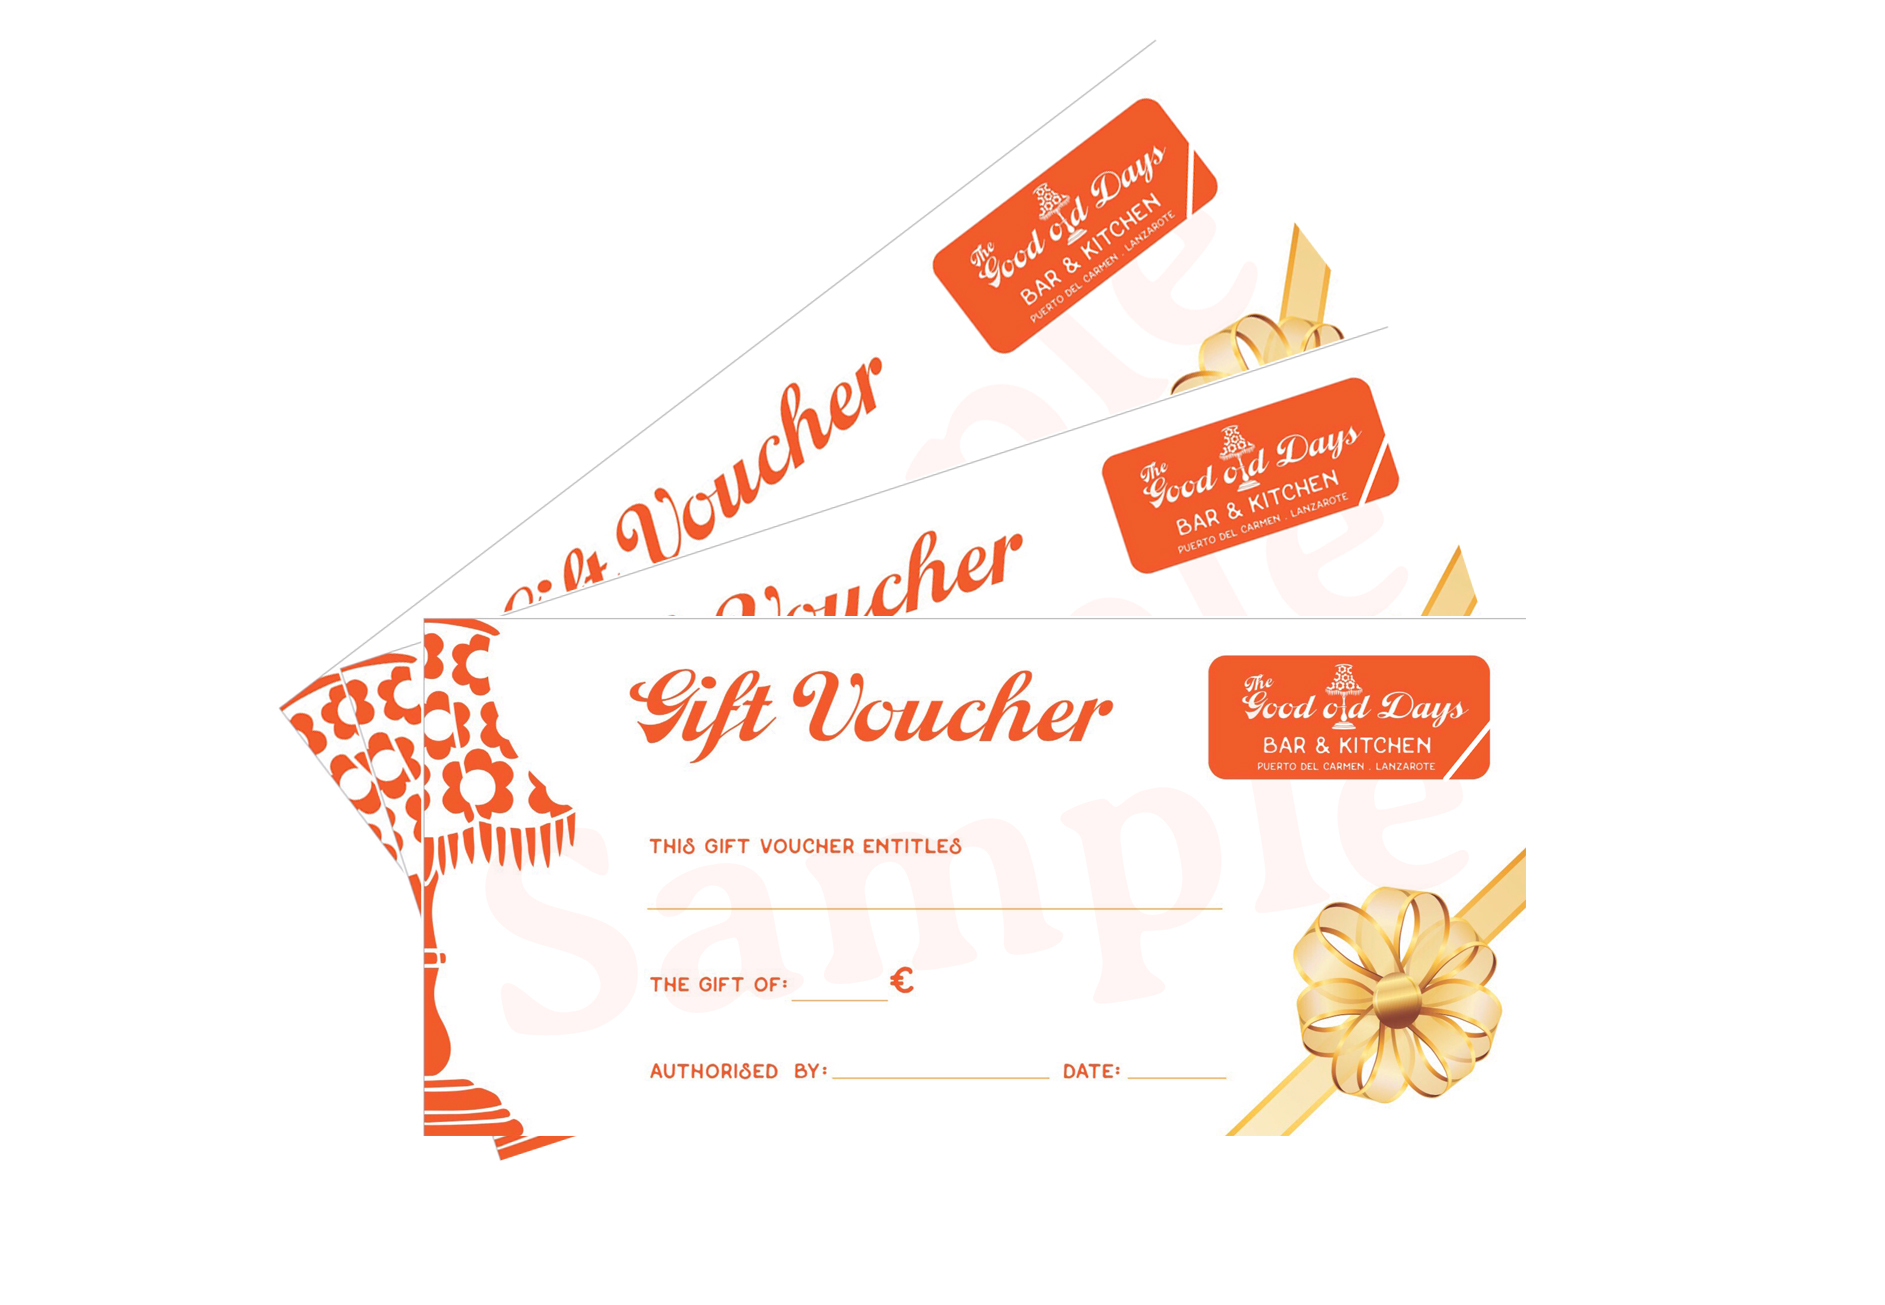 The Good Old Days Gift Vouchers